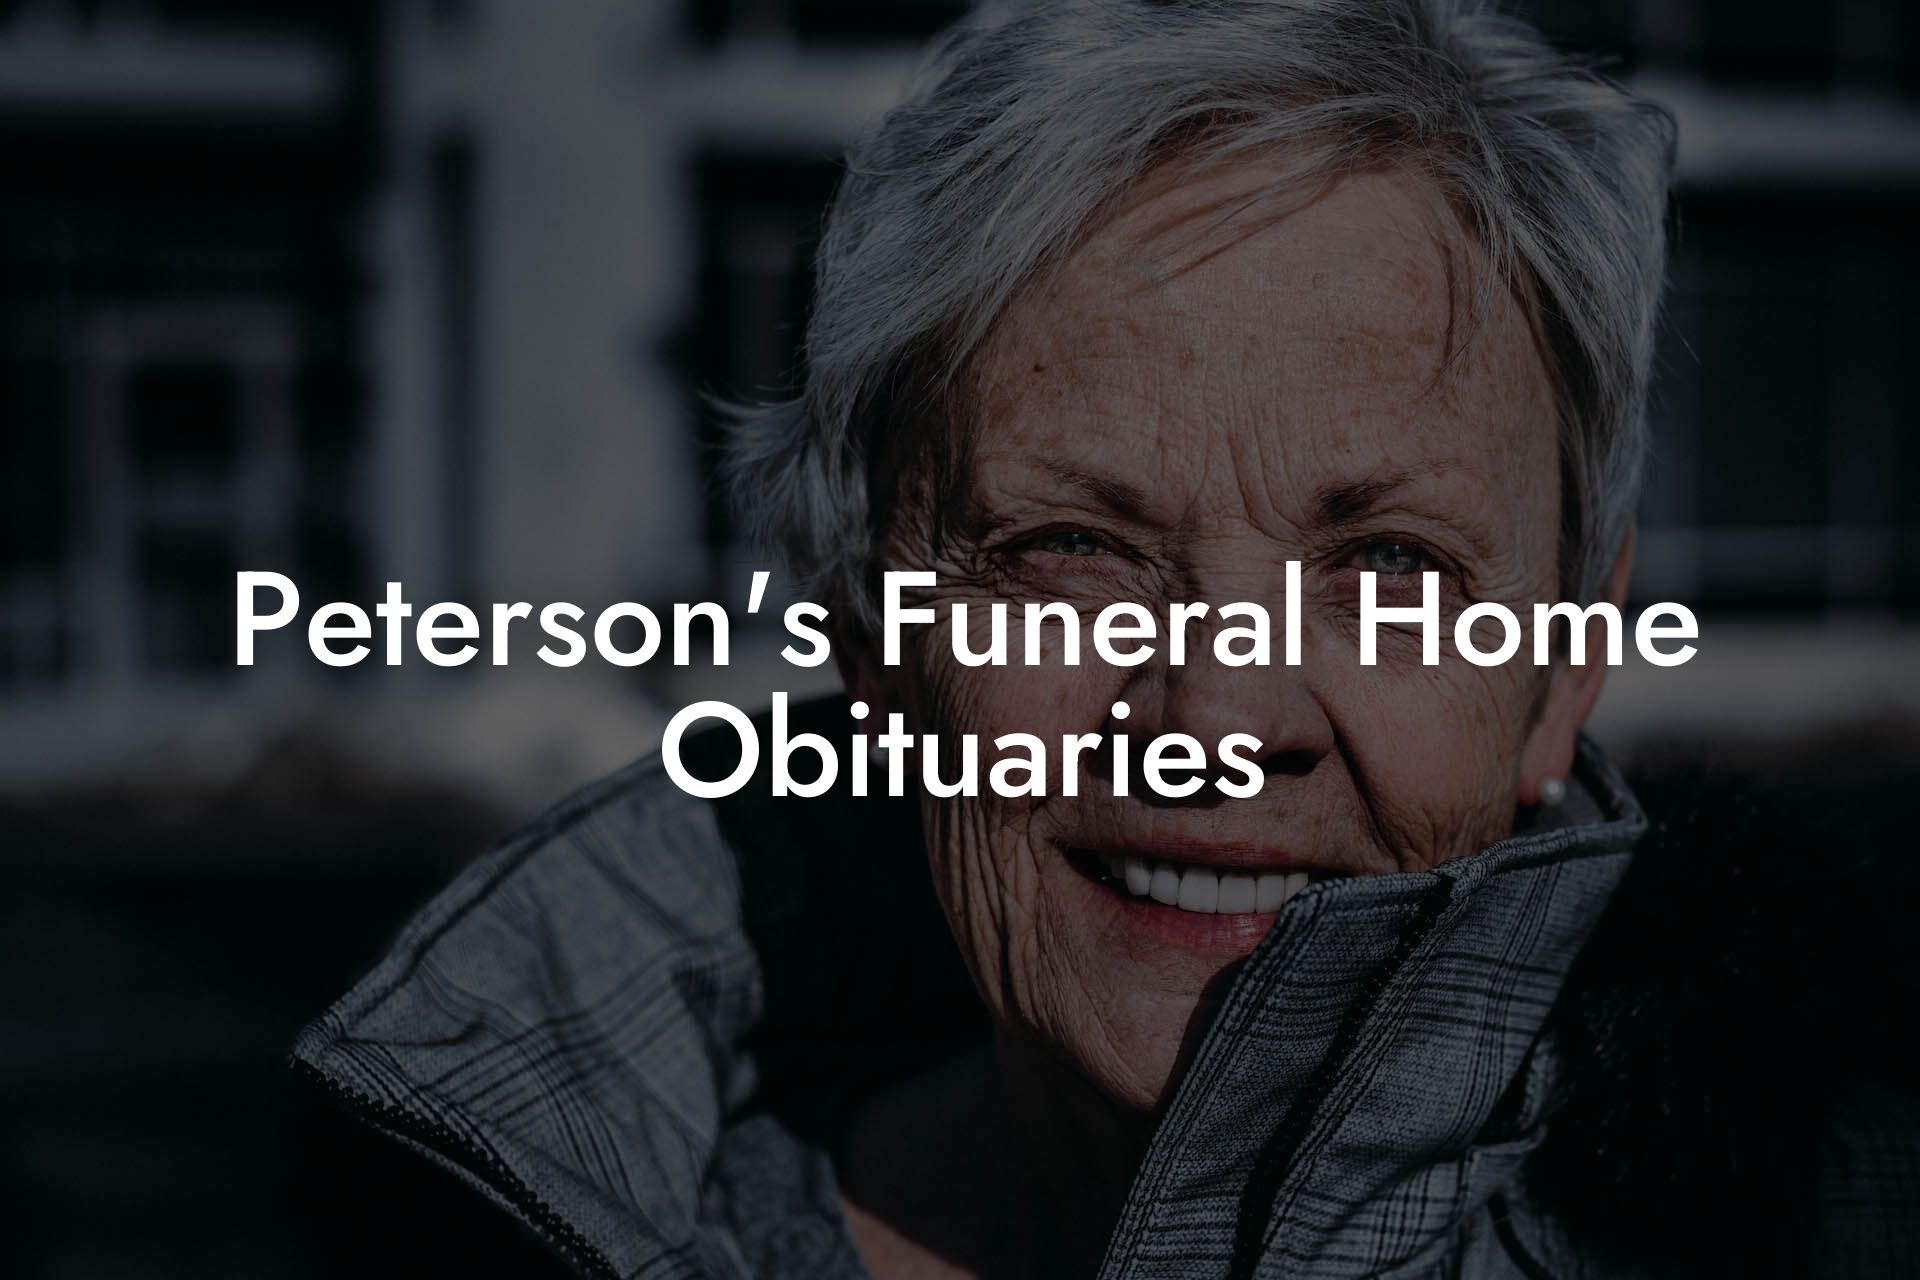 Peterson's Funeral Home Obituaries